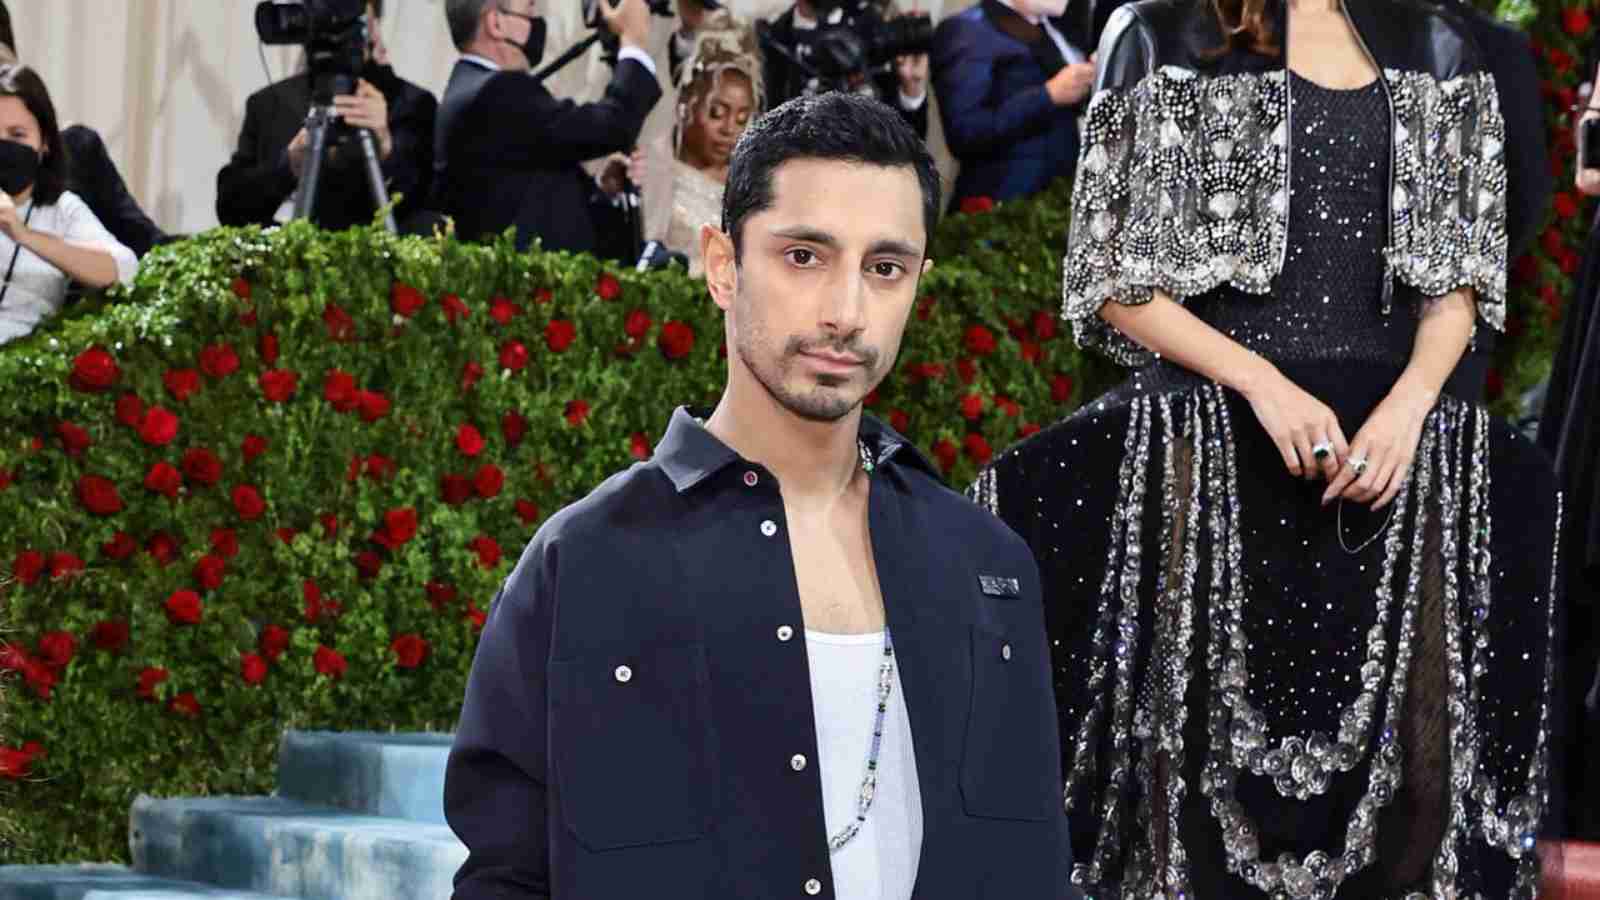 Riz Ahmed made a political statement with his outfit